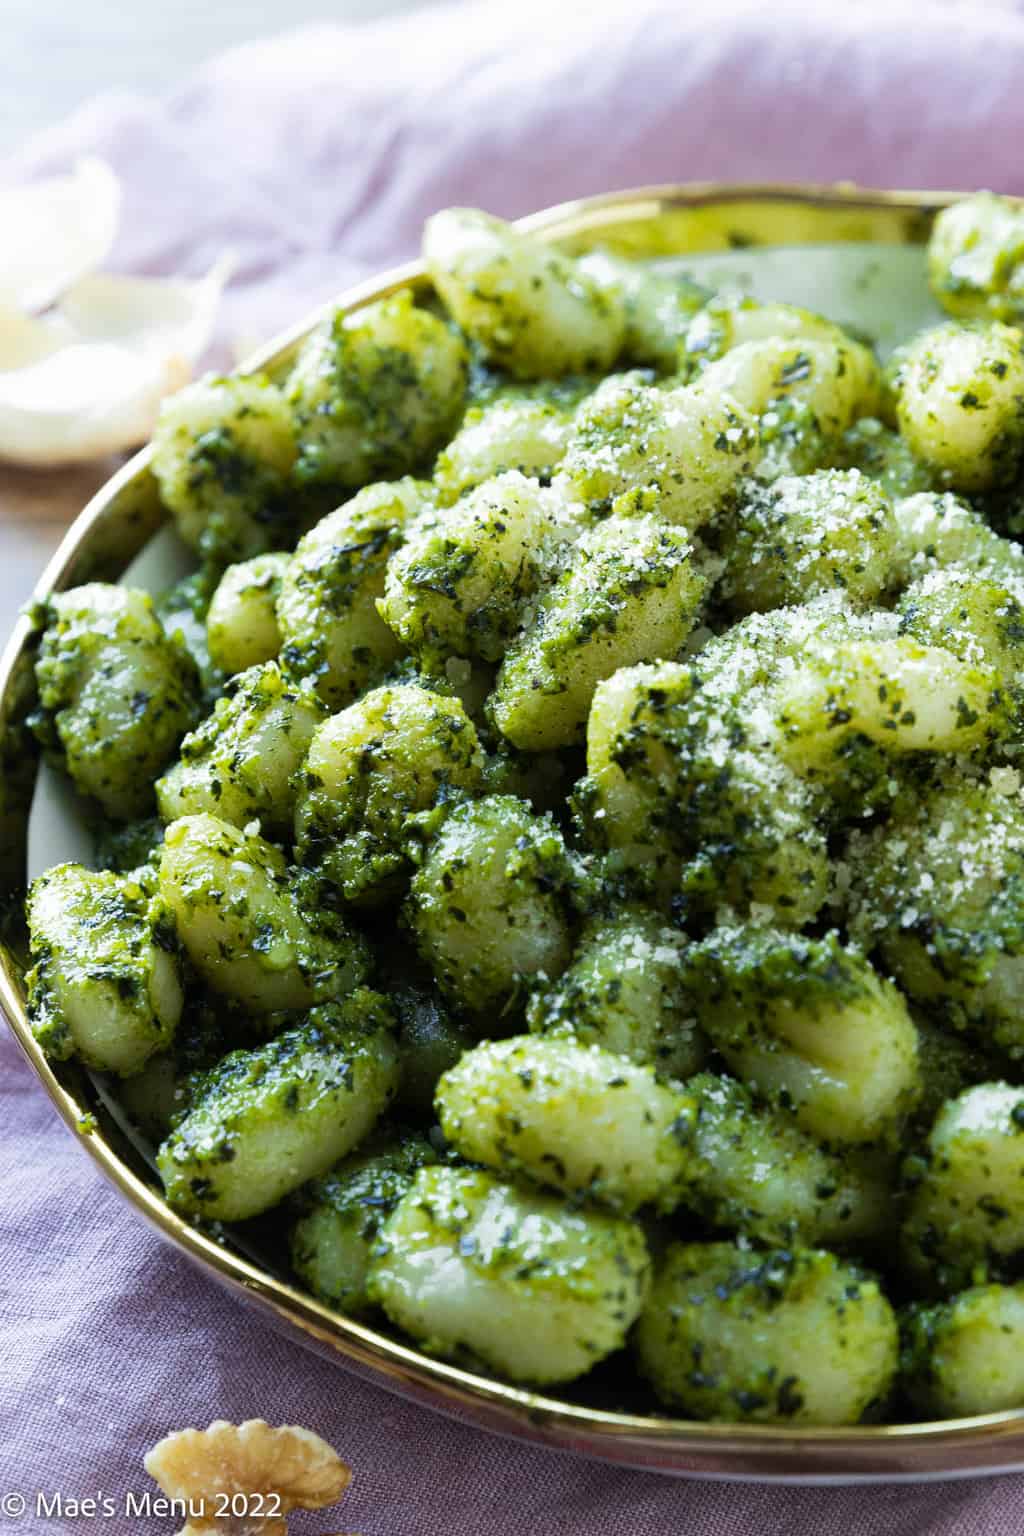 An up-close side shot of a bowl of pesto gnocchi sprinkled with parmesan cheese.